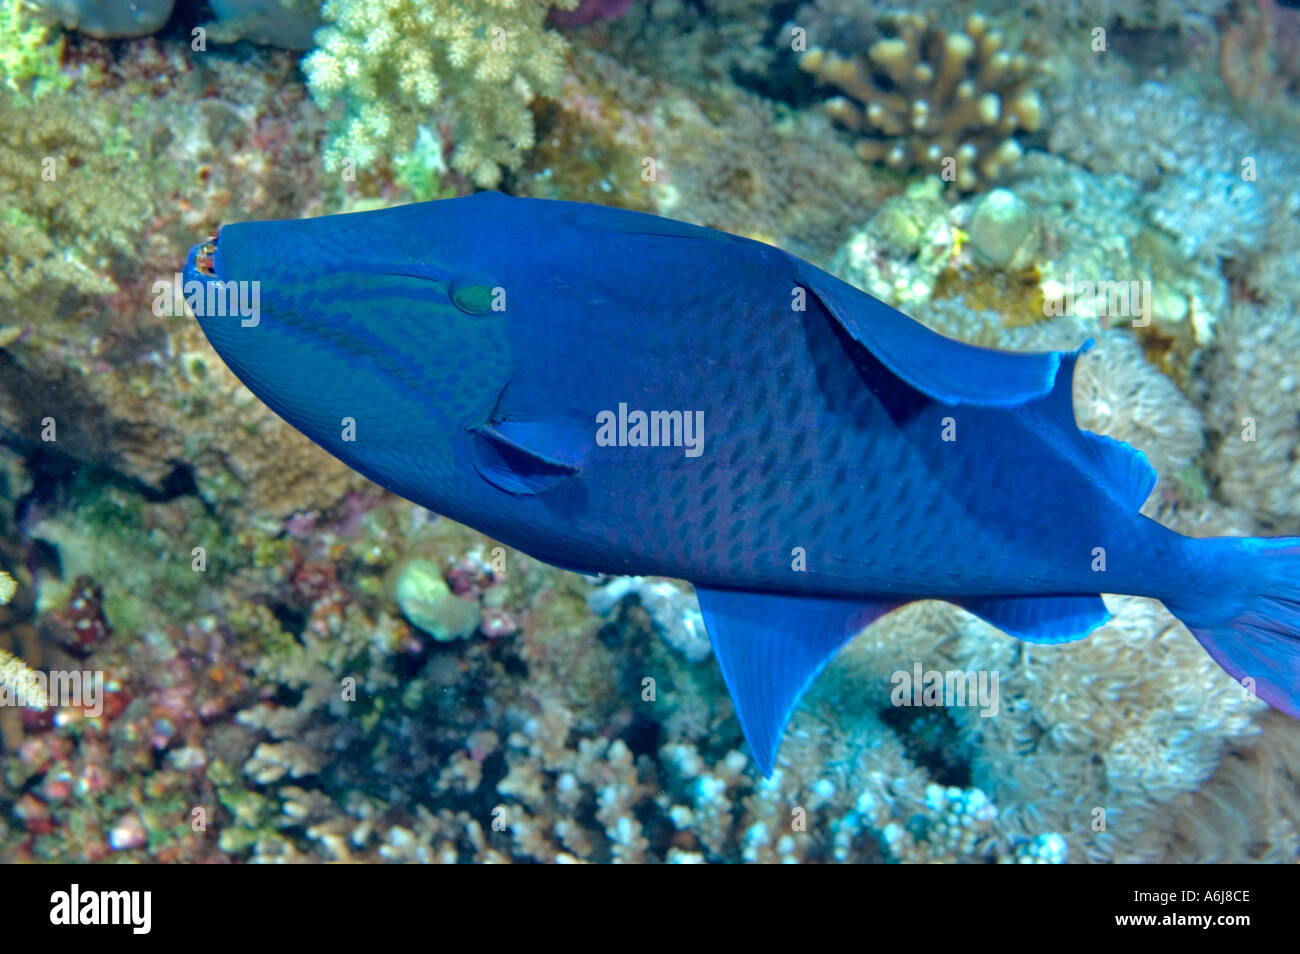 Blue Triggerfish (Pseudobalistes fuscus) in the Southern Red Sea, Egypt Stock Photo